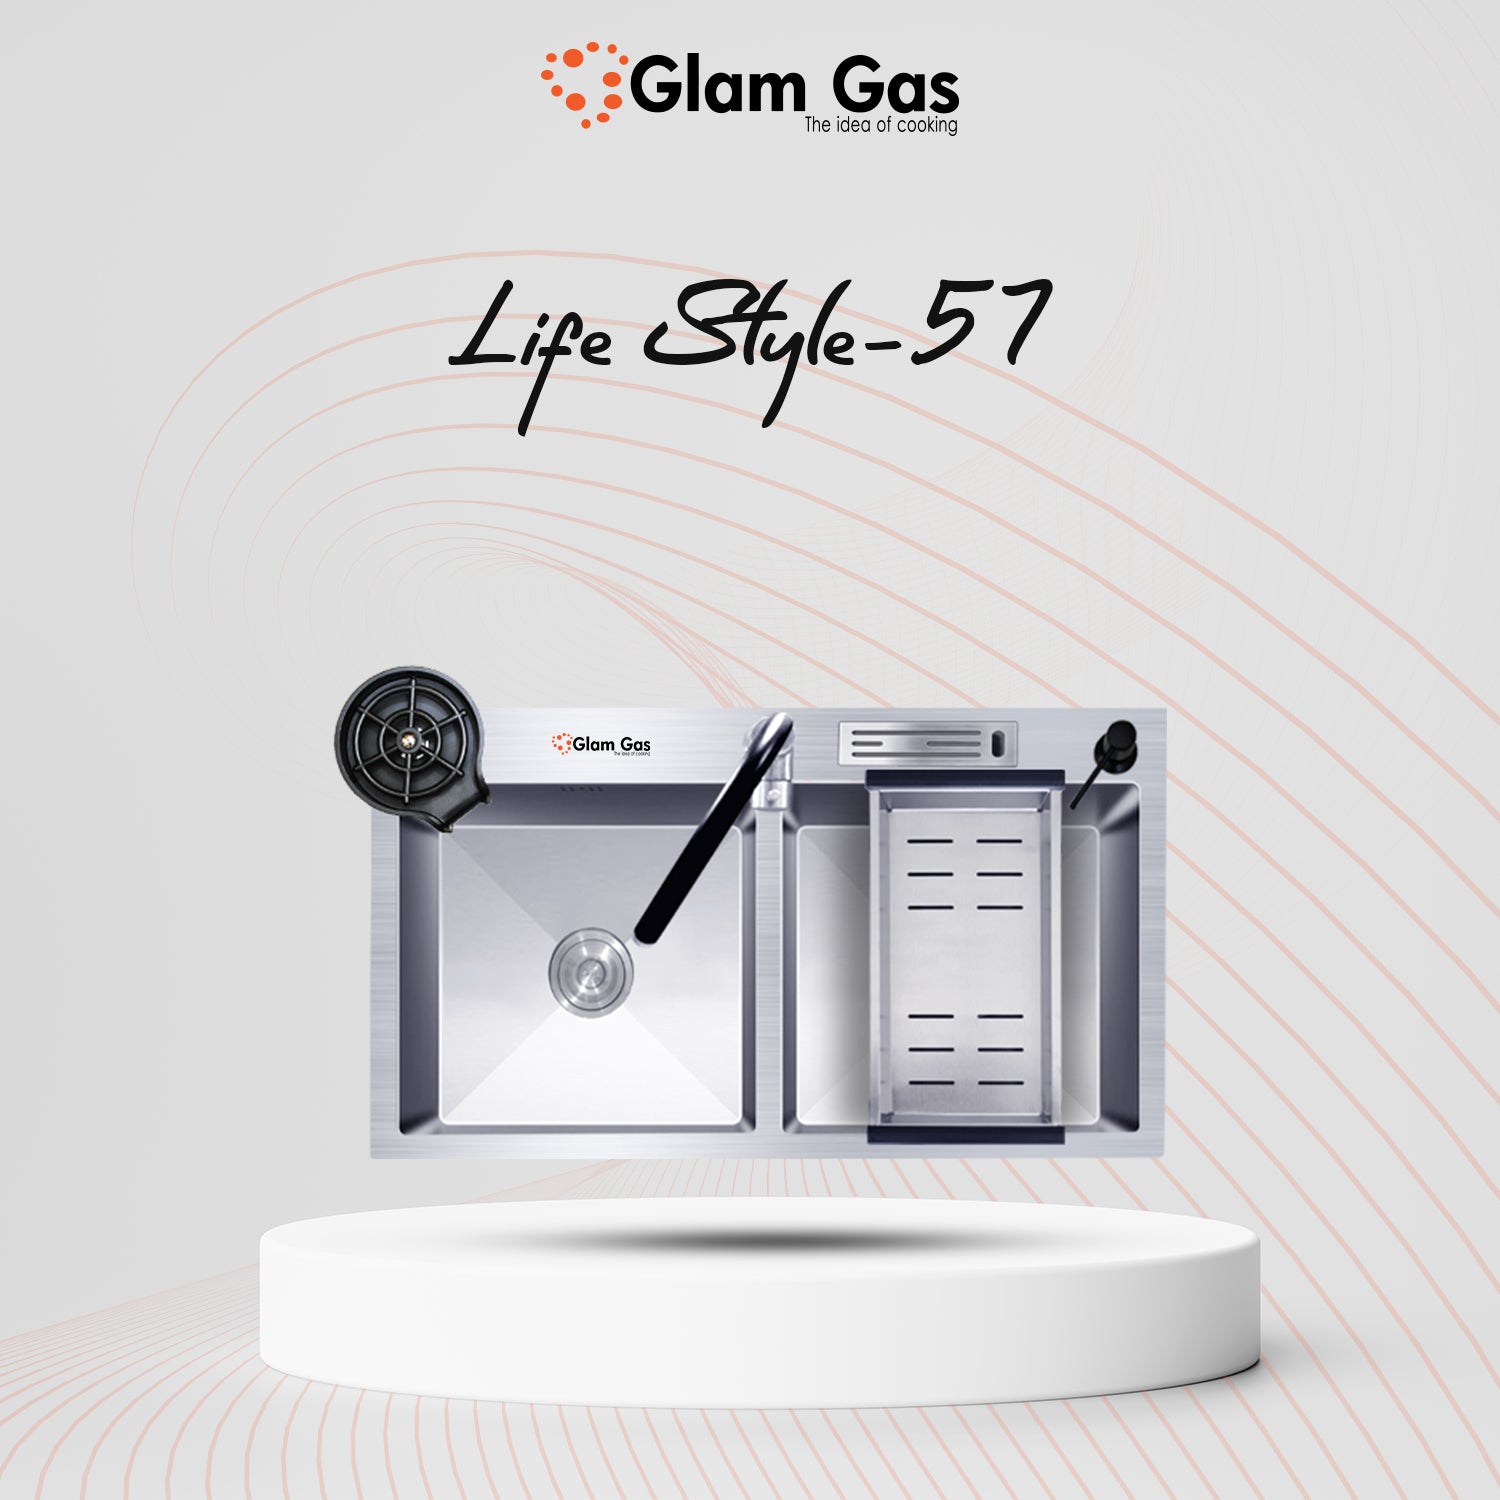 Glamgas Buy Now Life Style 57 | Glam Gas Sink Lowest Price in Pakistan